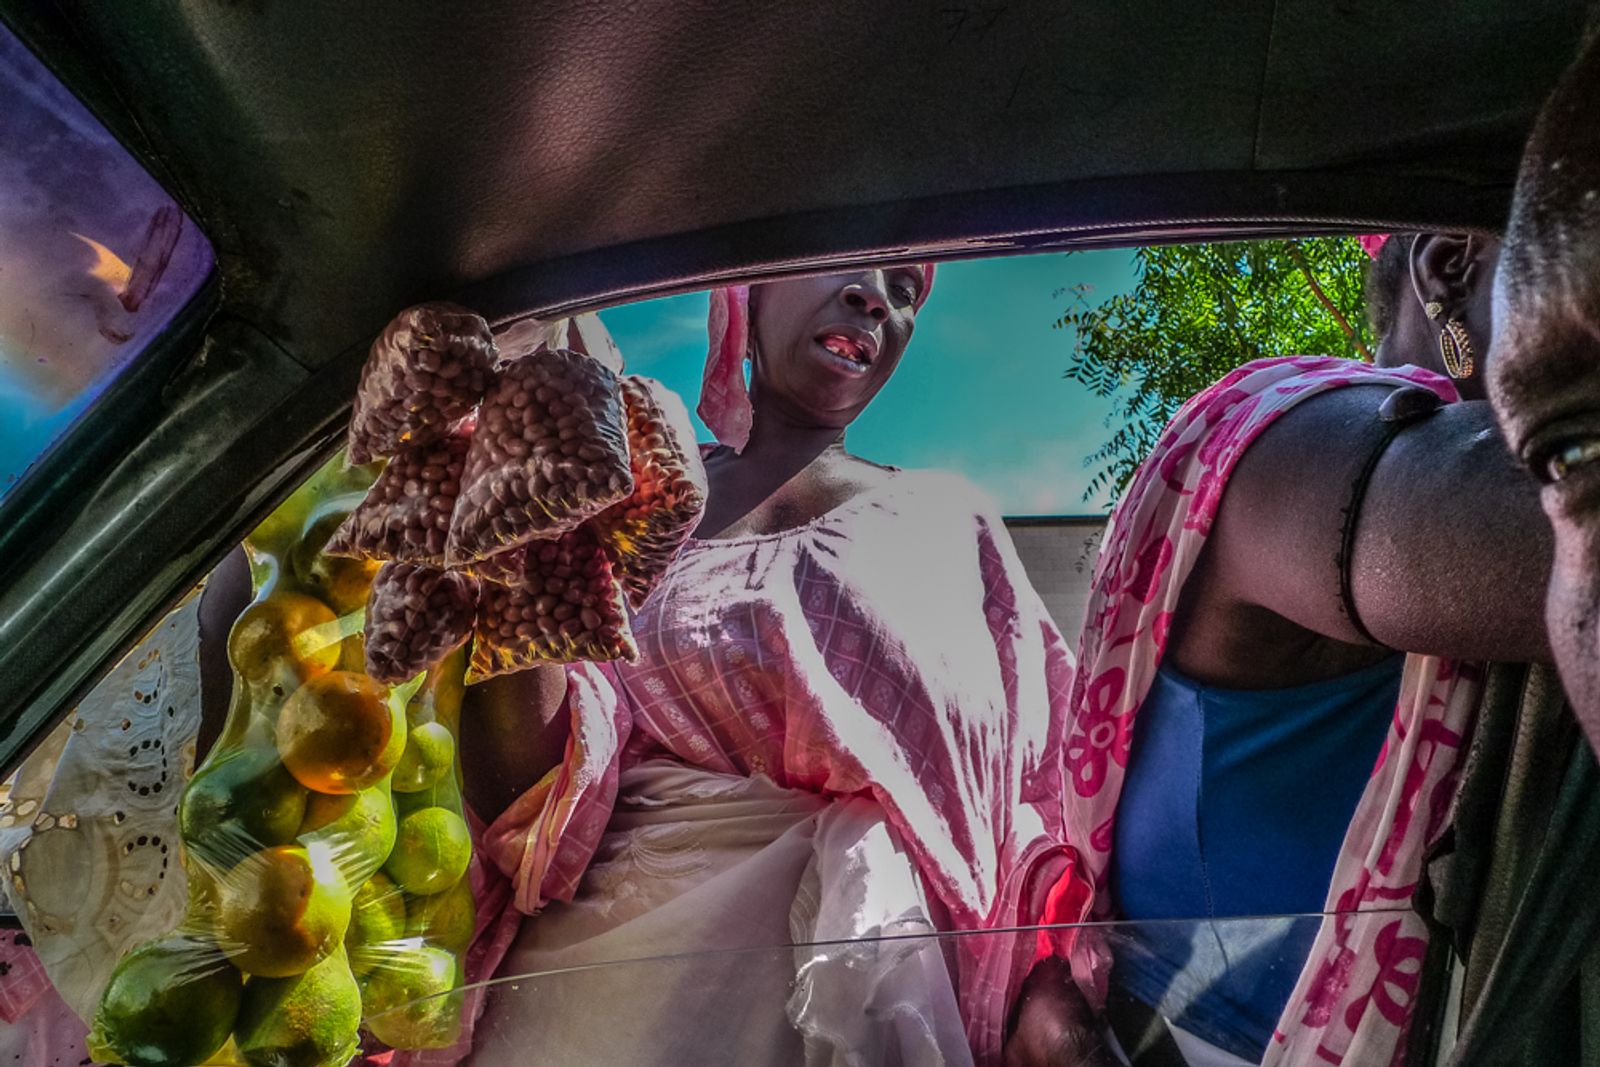 © Werner Mansholt - Image from the Senegal Hawkers photography project